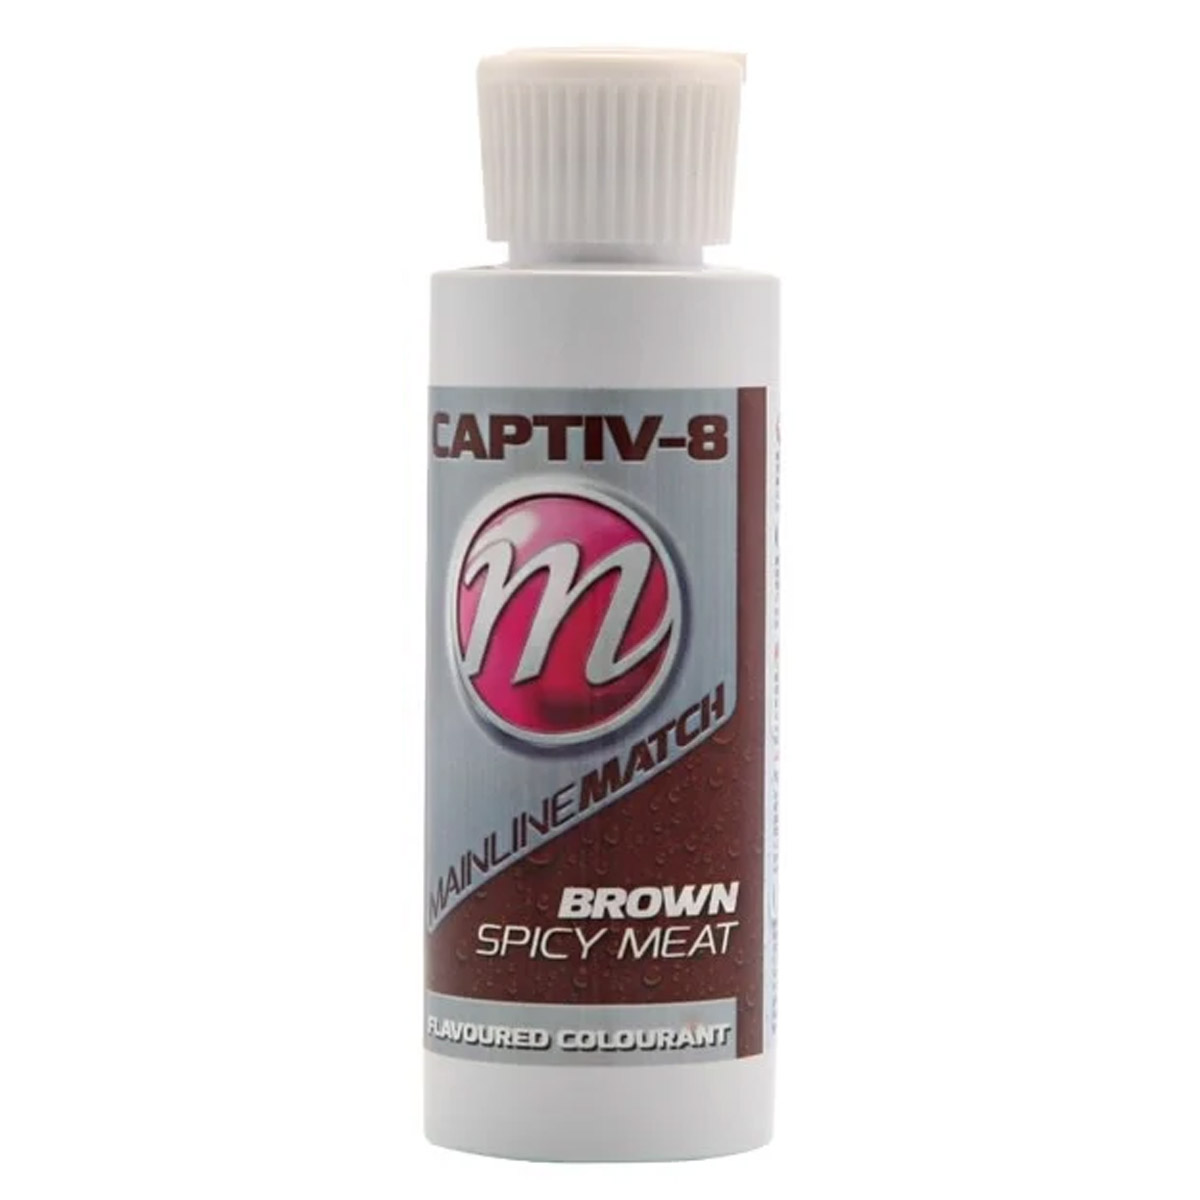 Mainline Flavoured Colourant Brown - Spicy Meat